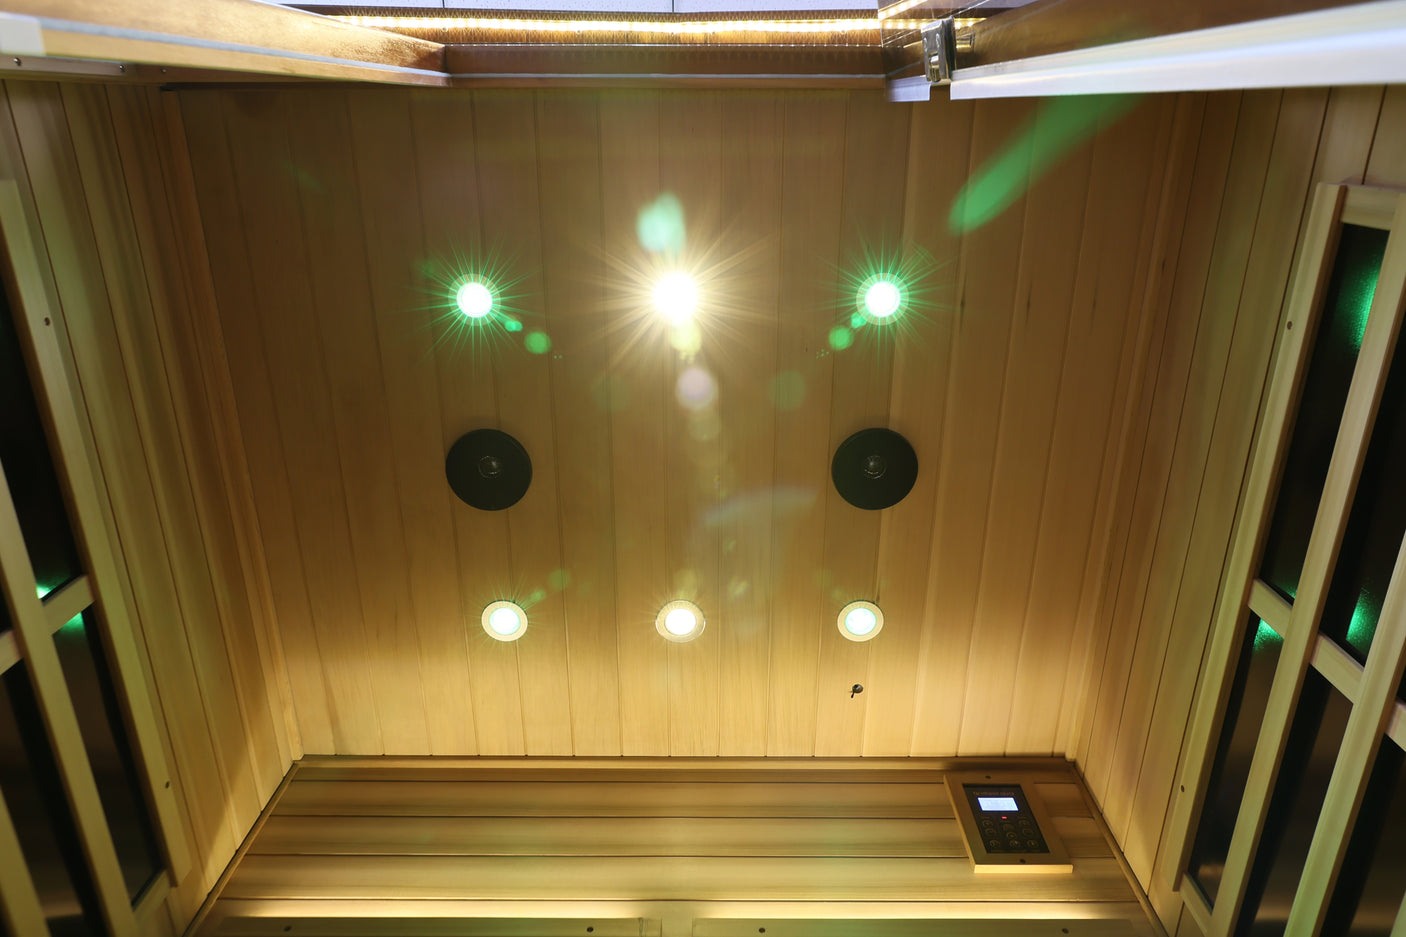 Outdoor Sauna for 4 Person,applicable indoors and outdoors. Far Infrared Sauna 8 Low EMF Heaters, Wooden Sauna Room 2050 Watt, mahogany wood, Chromotherapy, Bluetooth Speaker, LCD, LED.